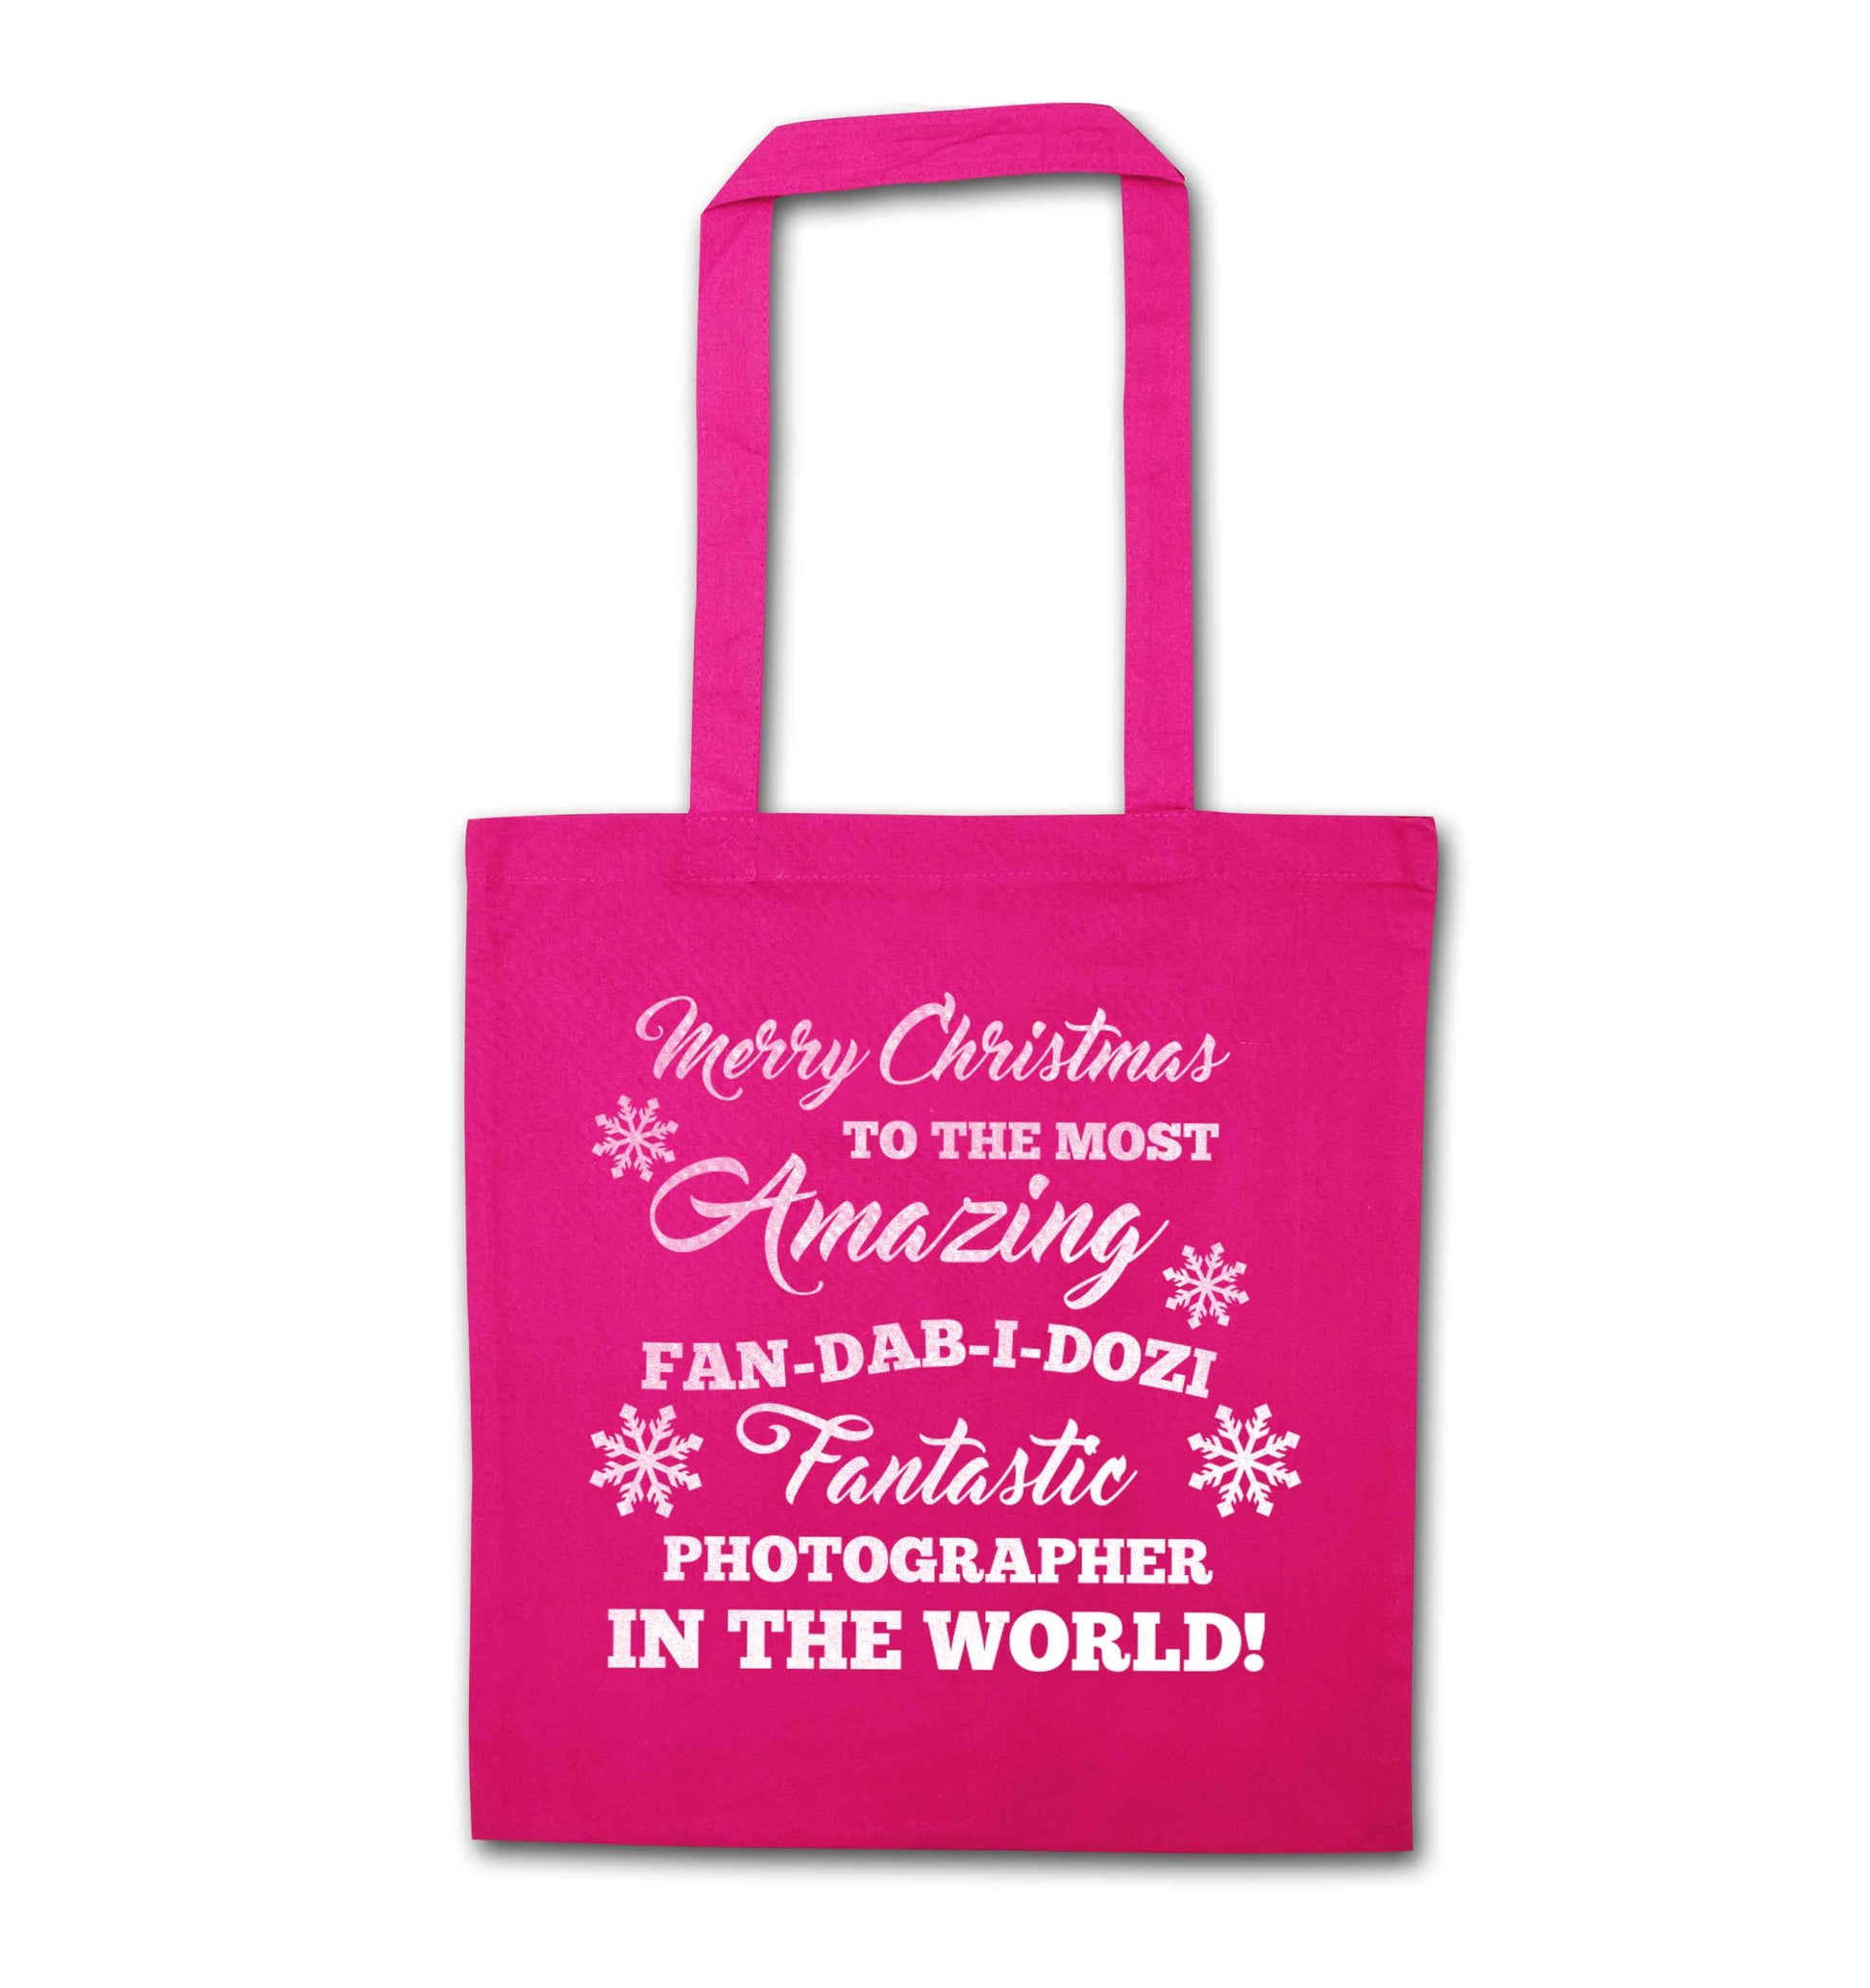 Merry Christmas to the most amazing fan-dab-i-dozi fantasic photographer in the world pink tote bag